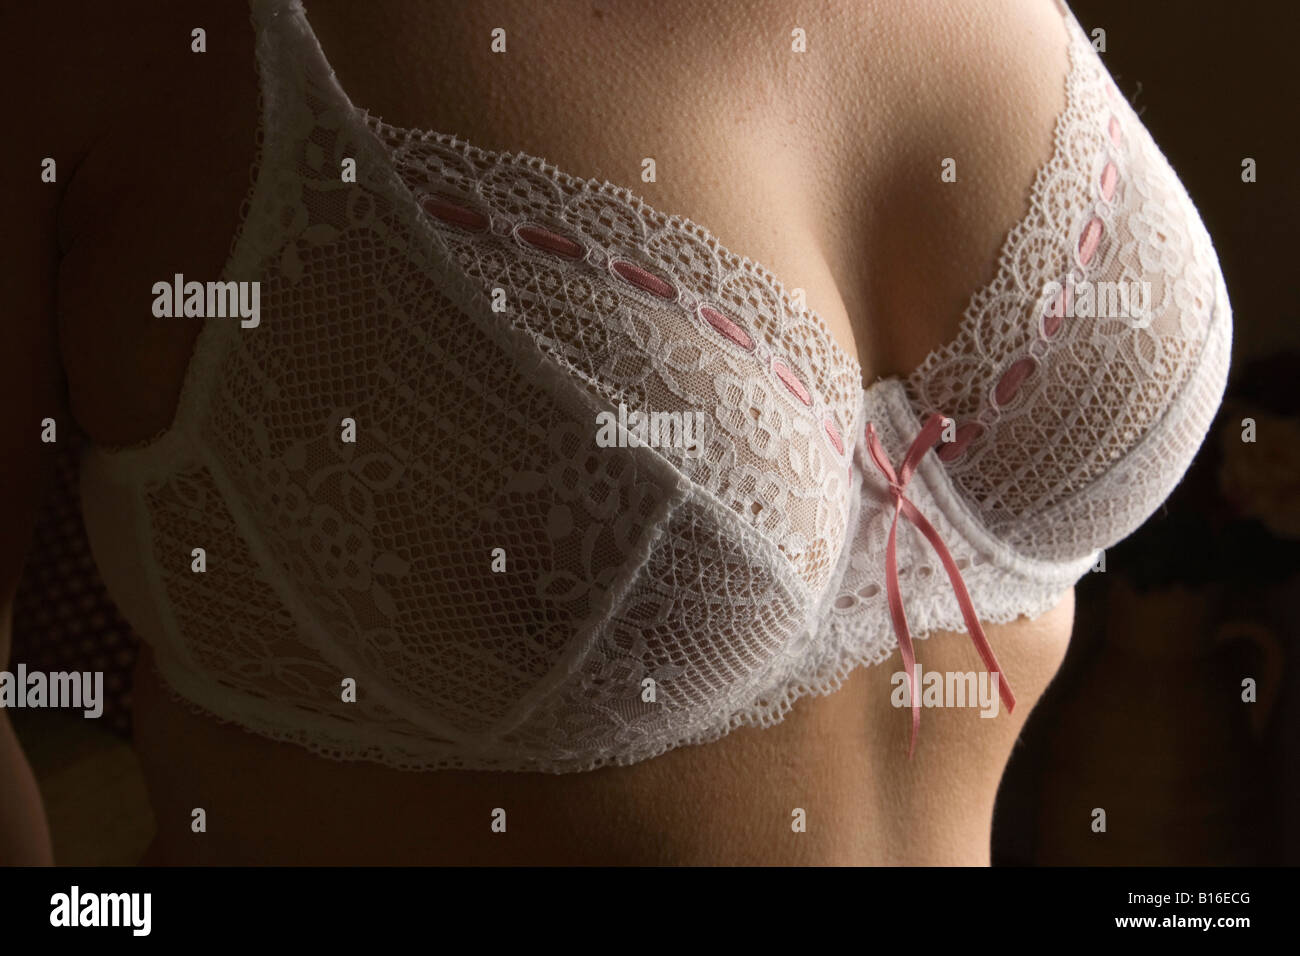 sexy woman's bra and cleavage, 34D size Stock Photo - Alamy